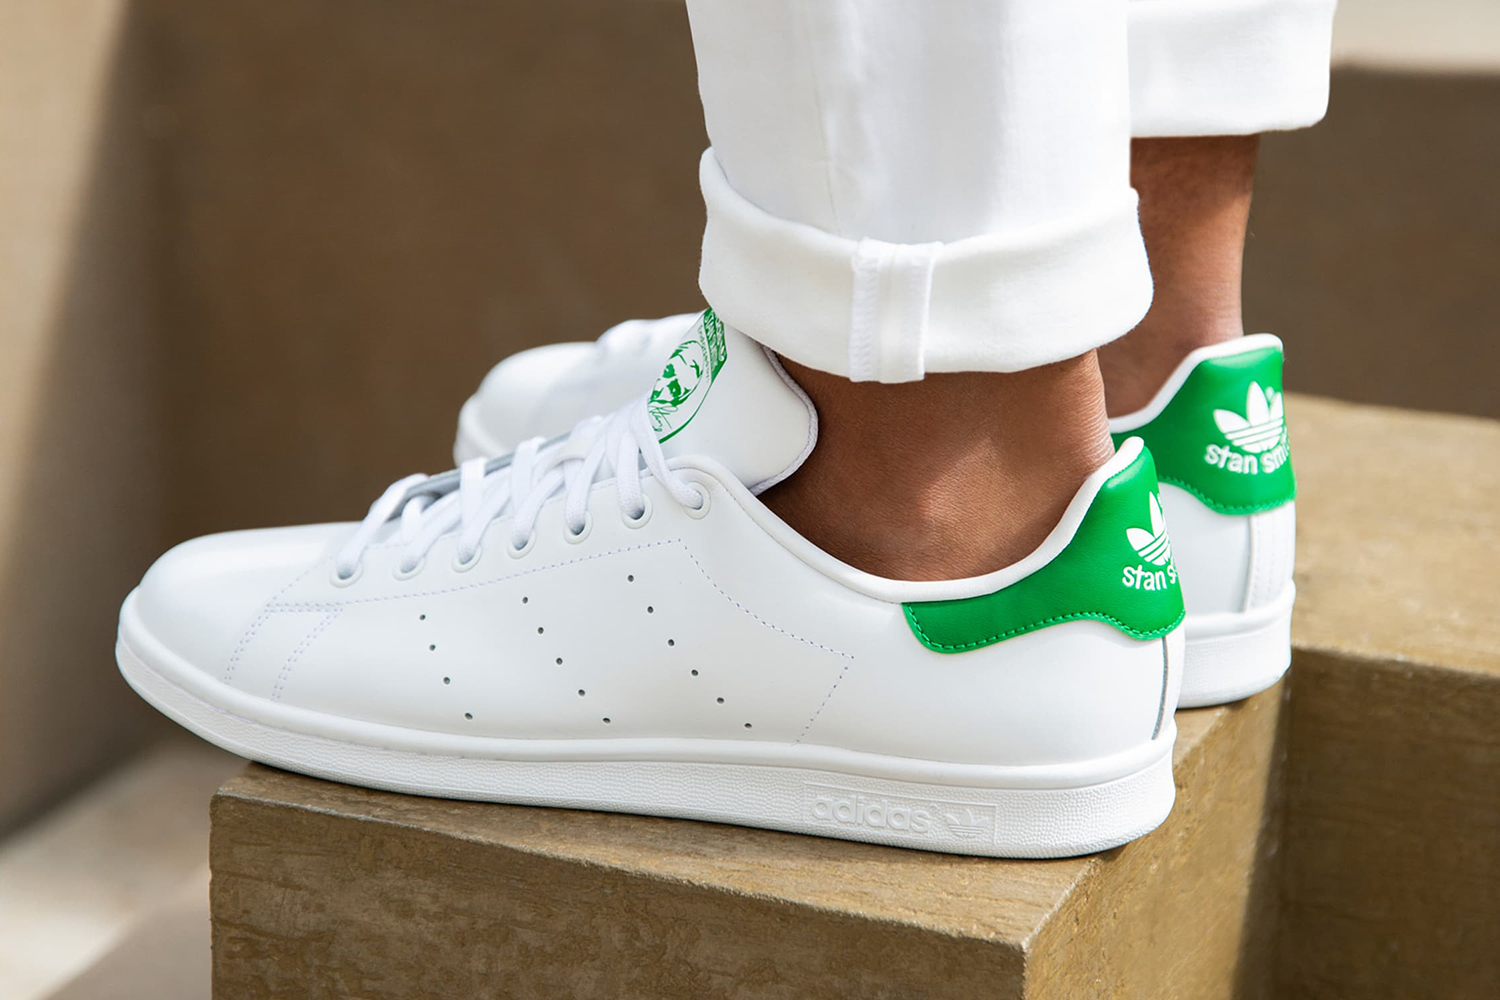 Adidas Stan Smith Sneakers Are 25% Off at Nordstrom - InsideHook